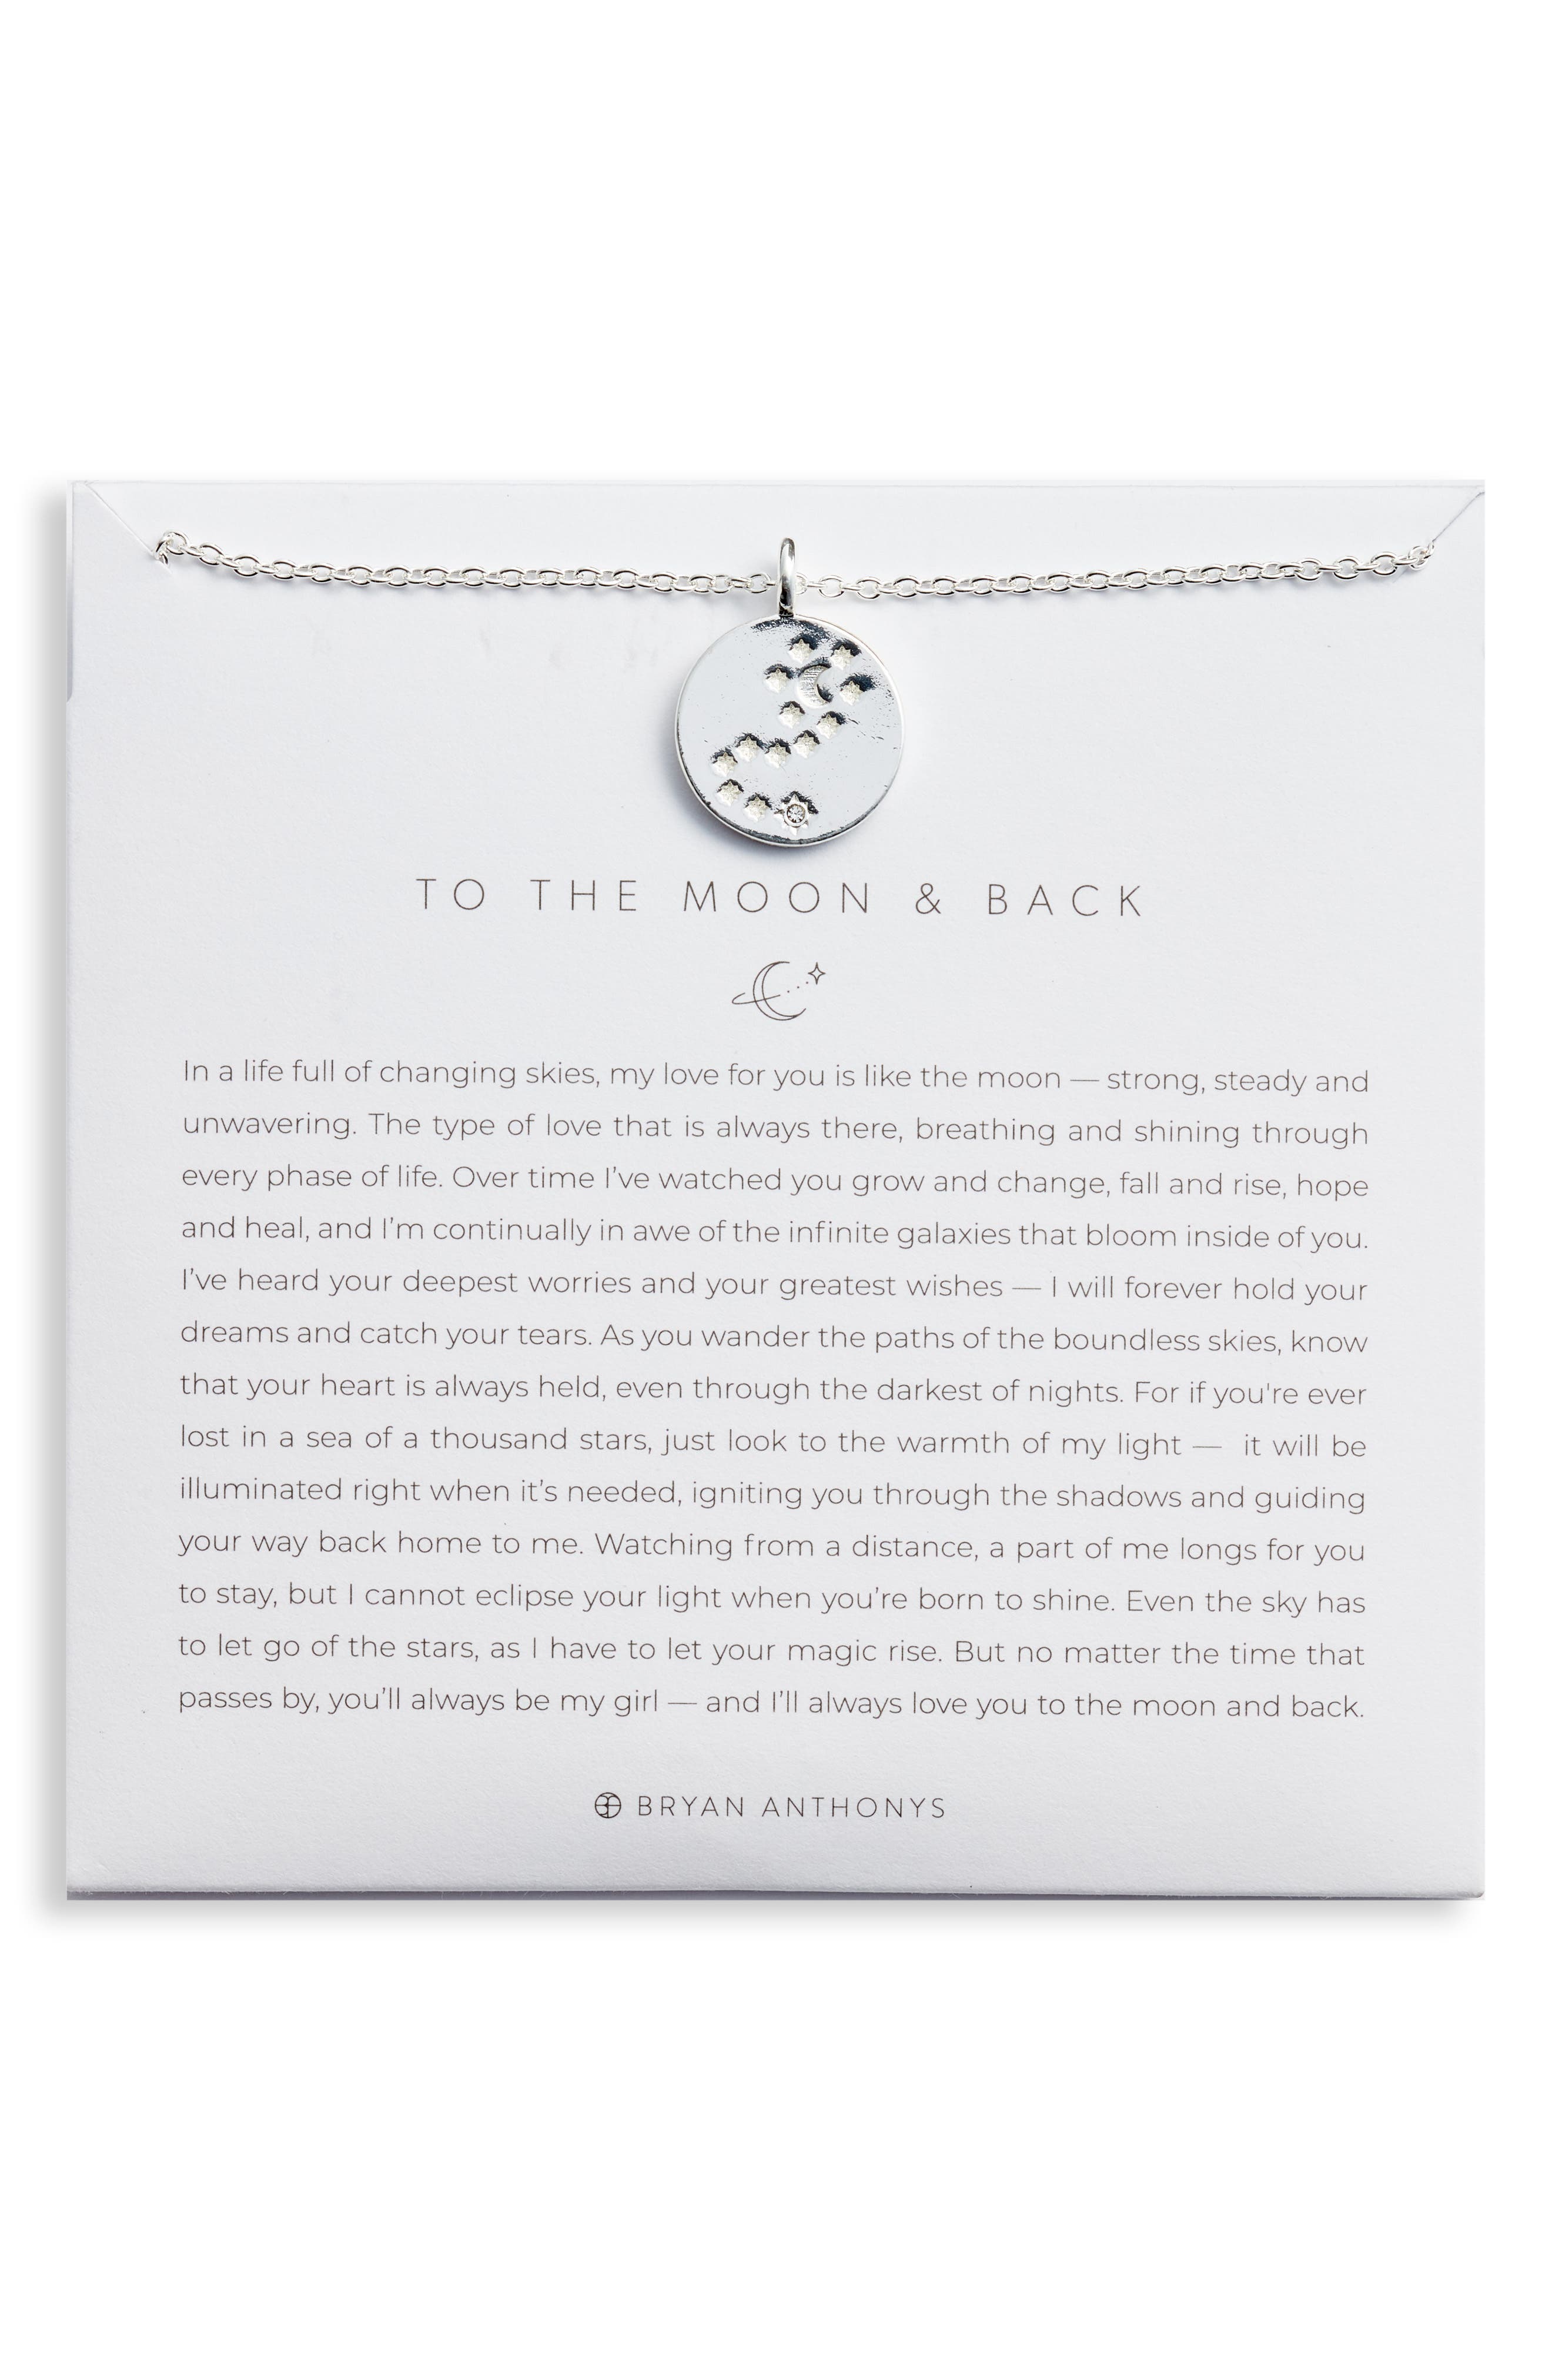 Bryan Anthonys To the Moon and Back Pendant Necklace in Silver at Nordstrom